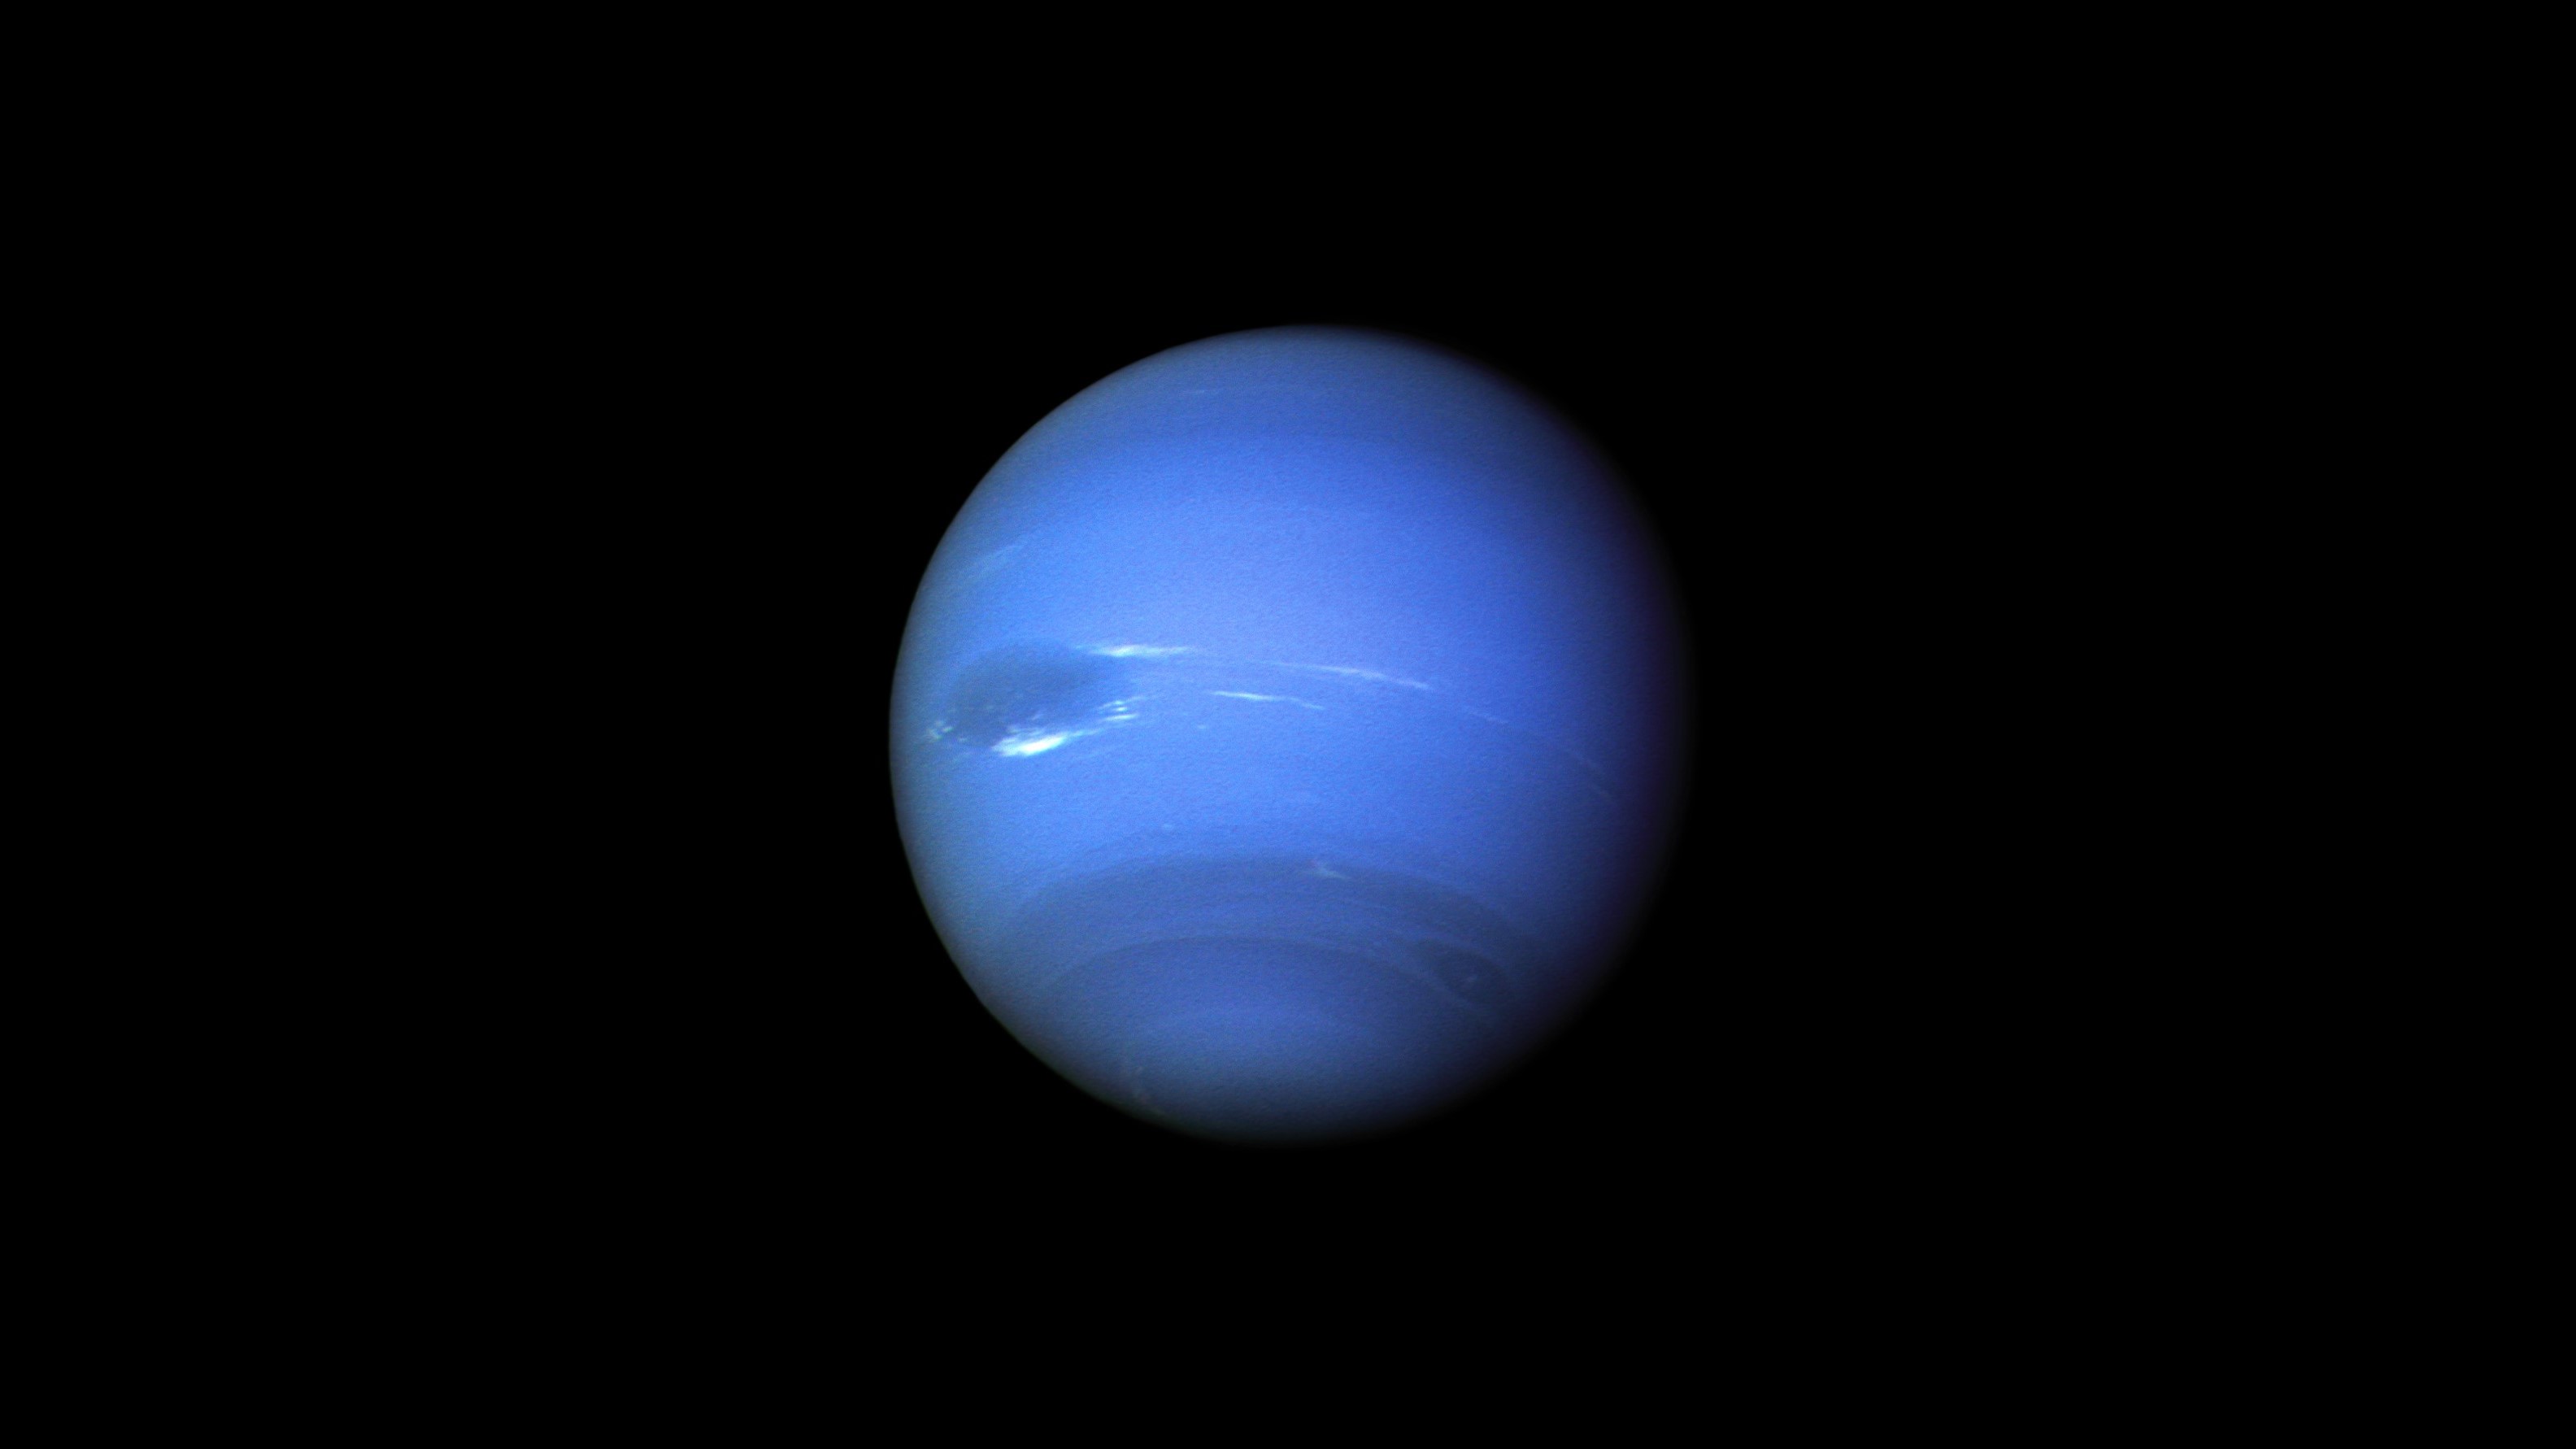 Neptune: The farthest planet